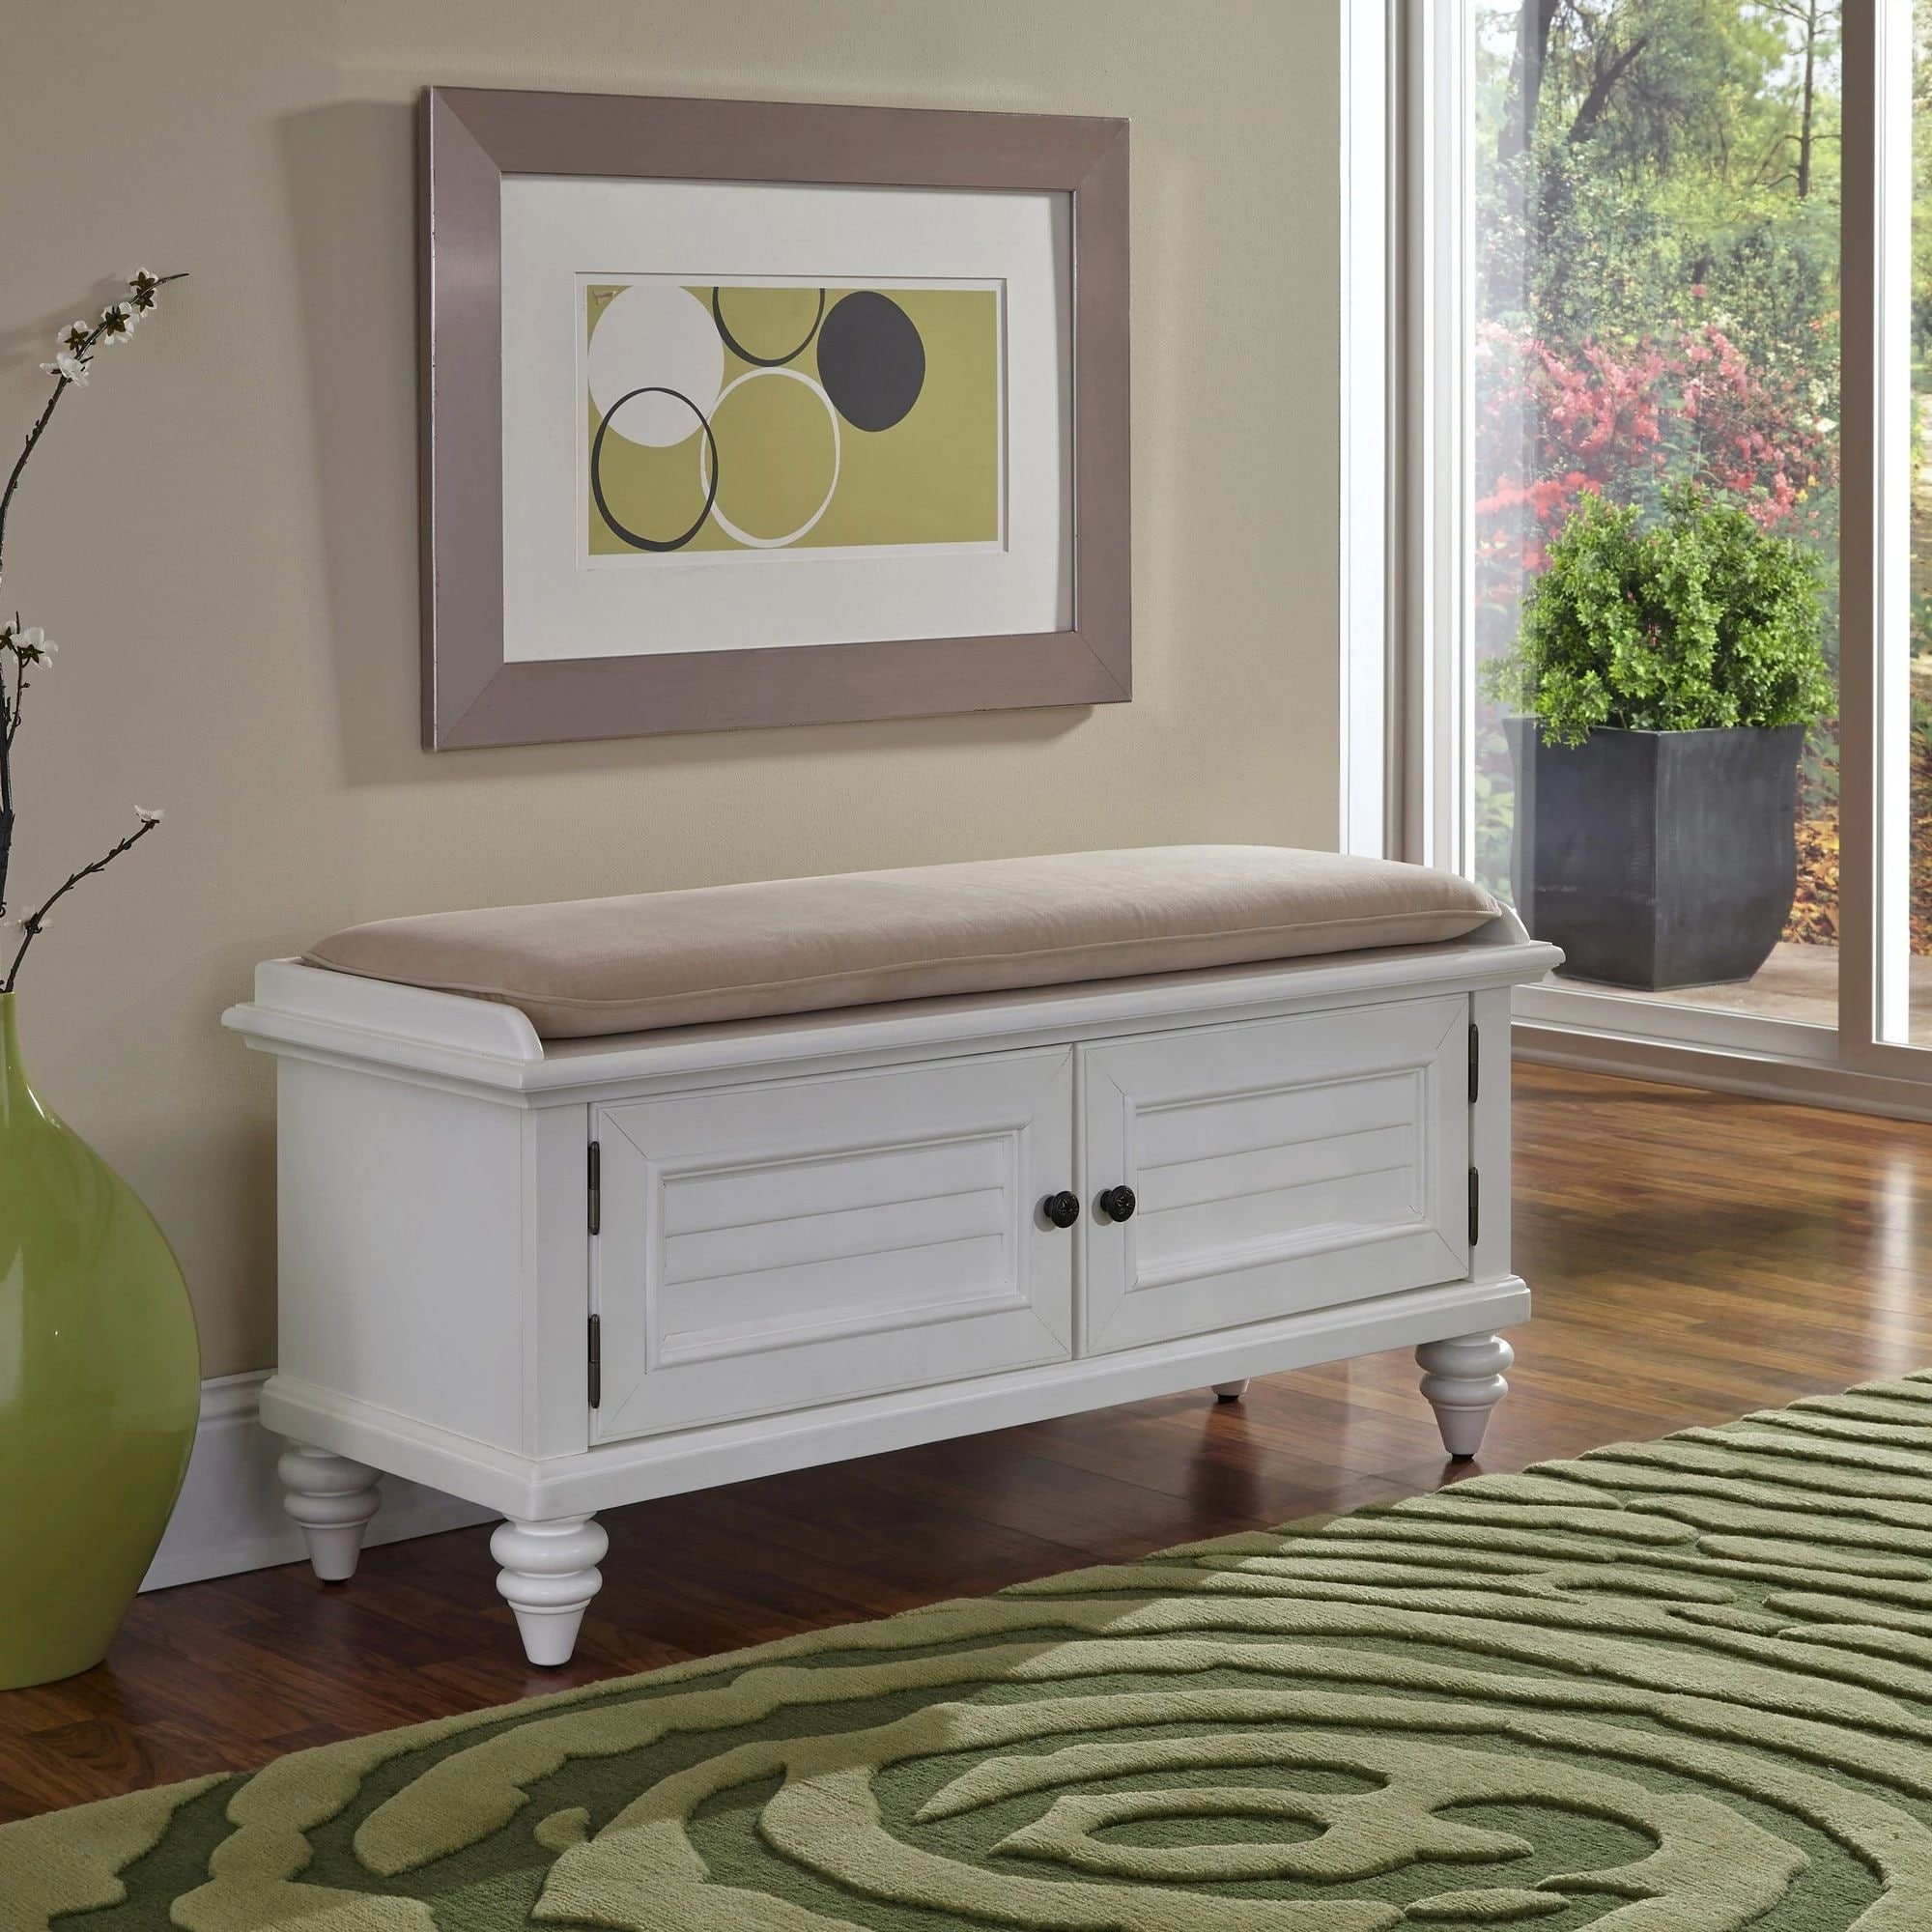 Bermuda Upholstered Storage Bench by Homestyles - Brushed White